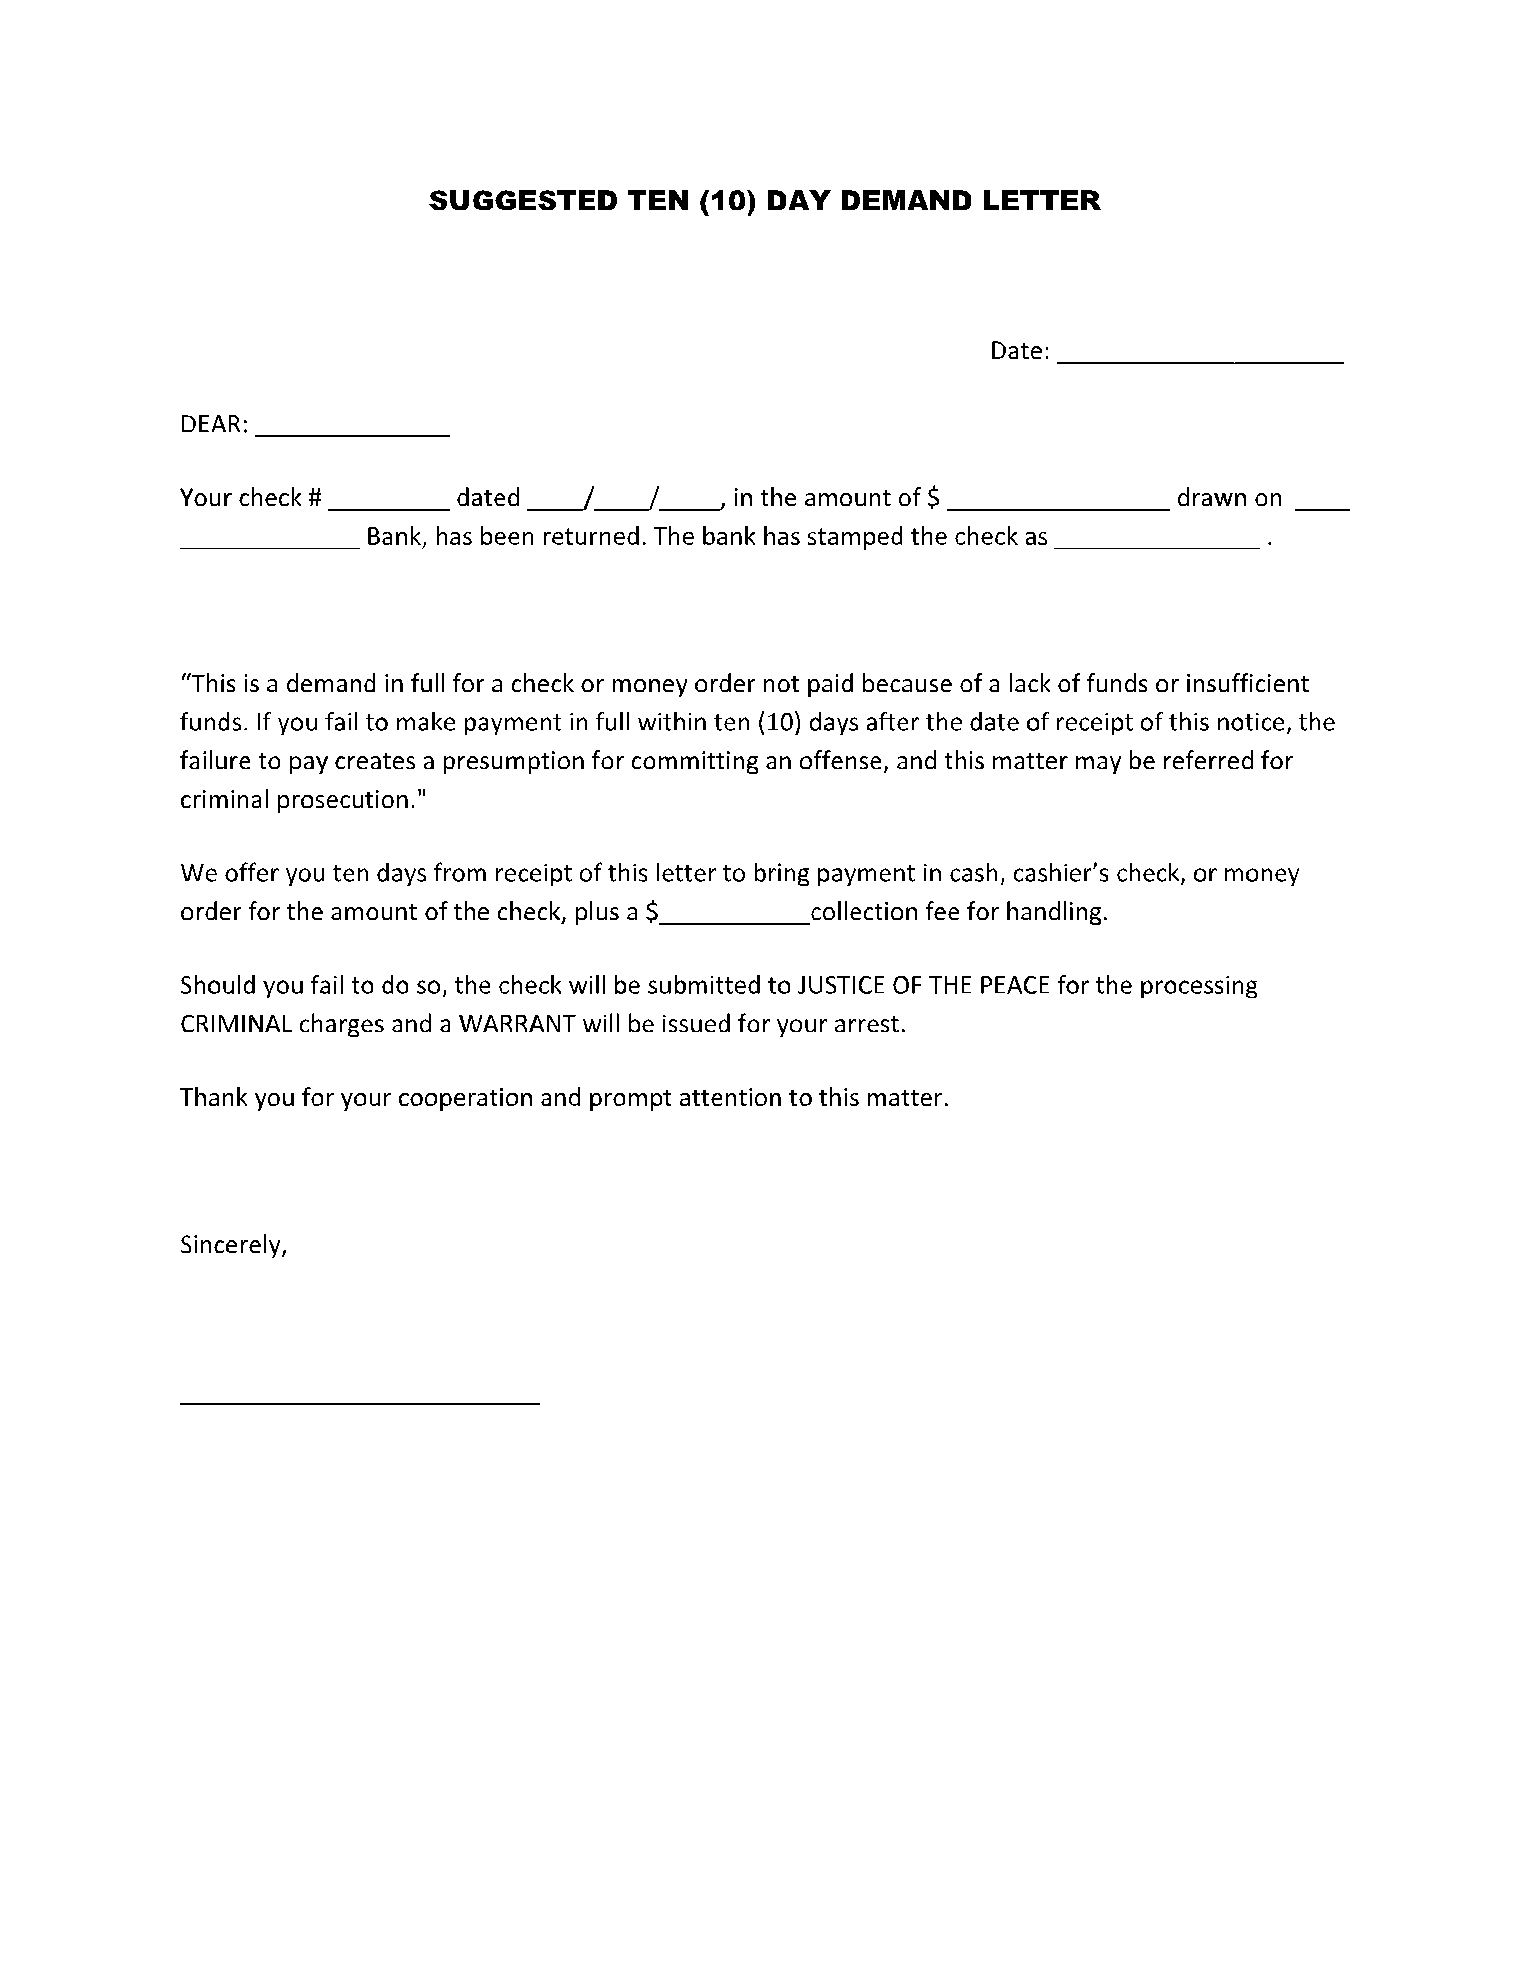 10-Day Demand Letter